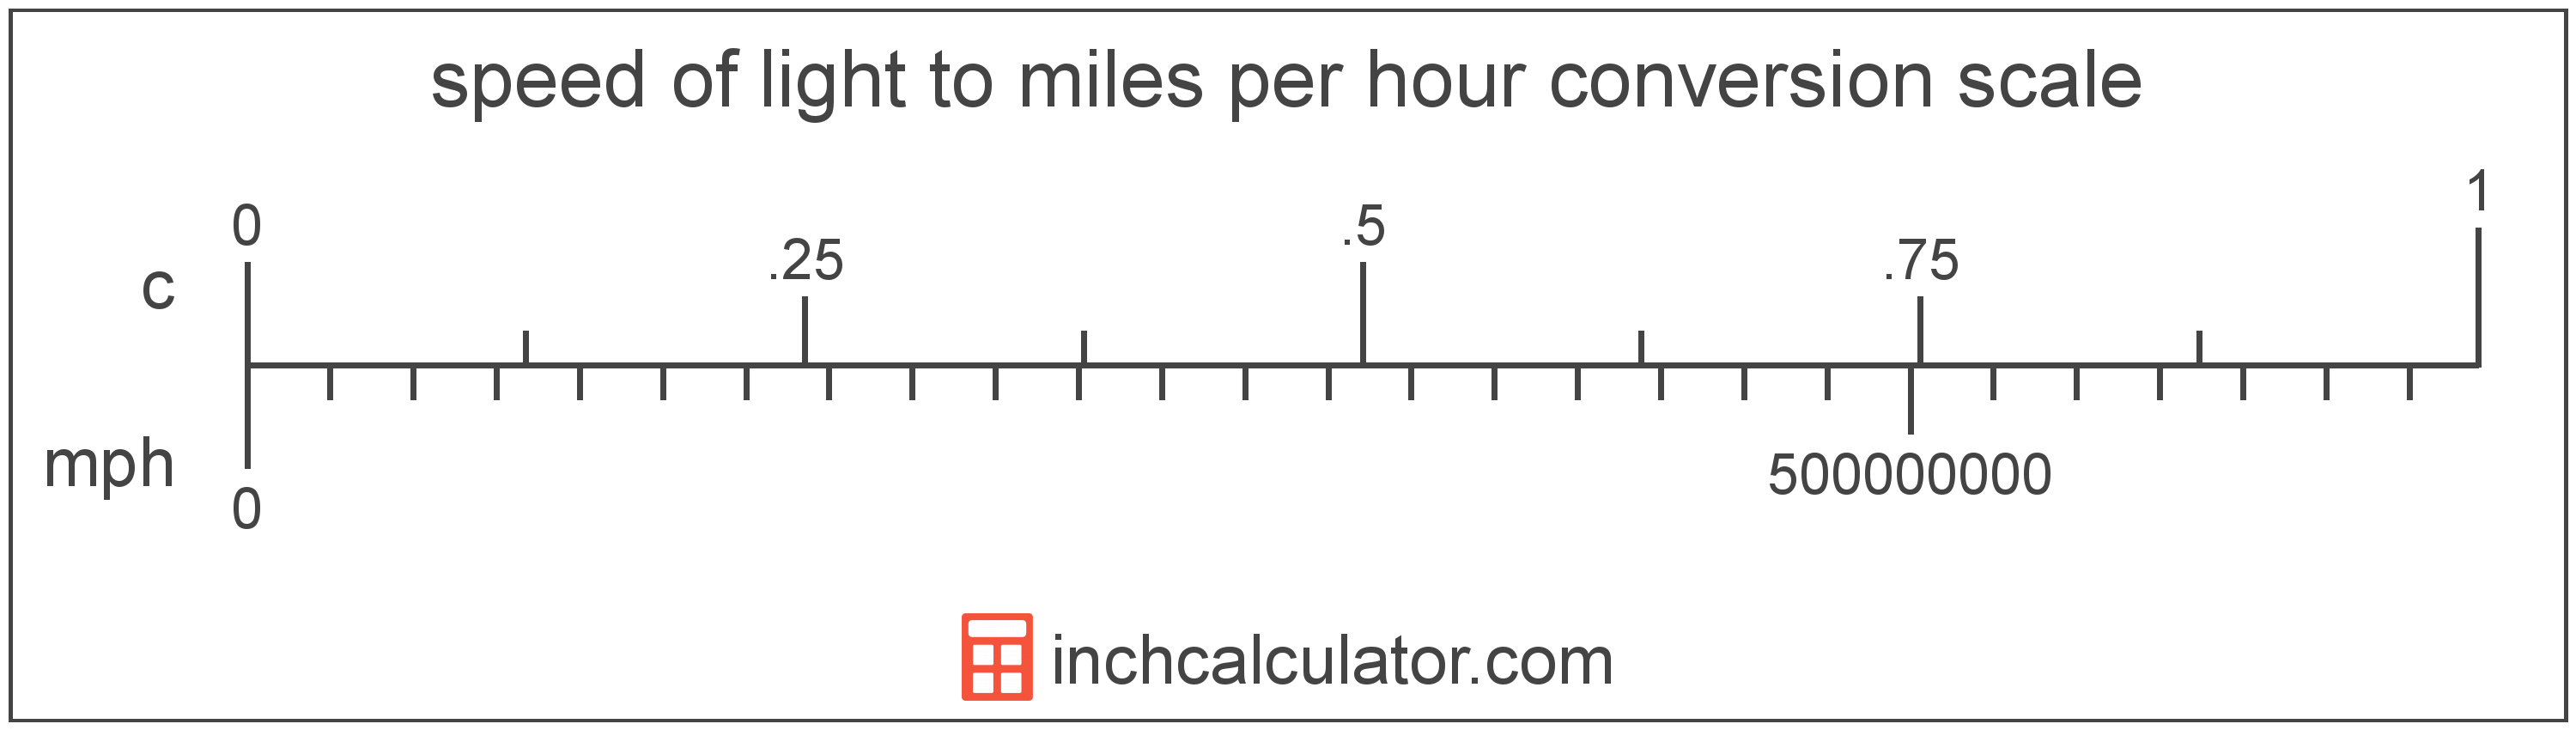 Miles Per Hour to Of Light Conversion to c)